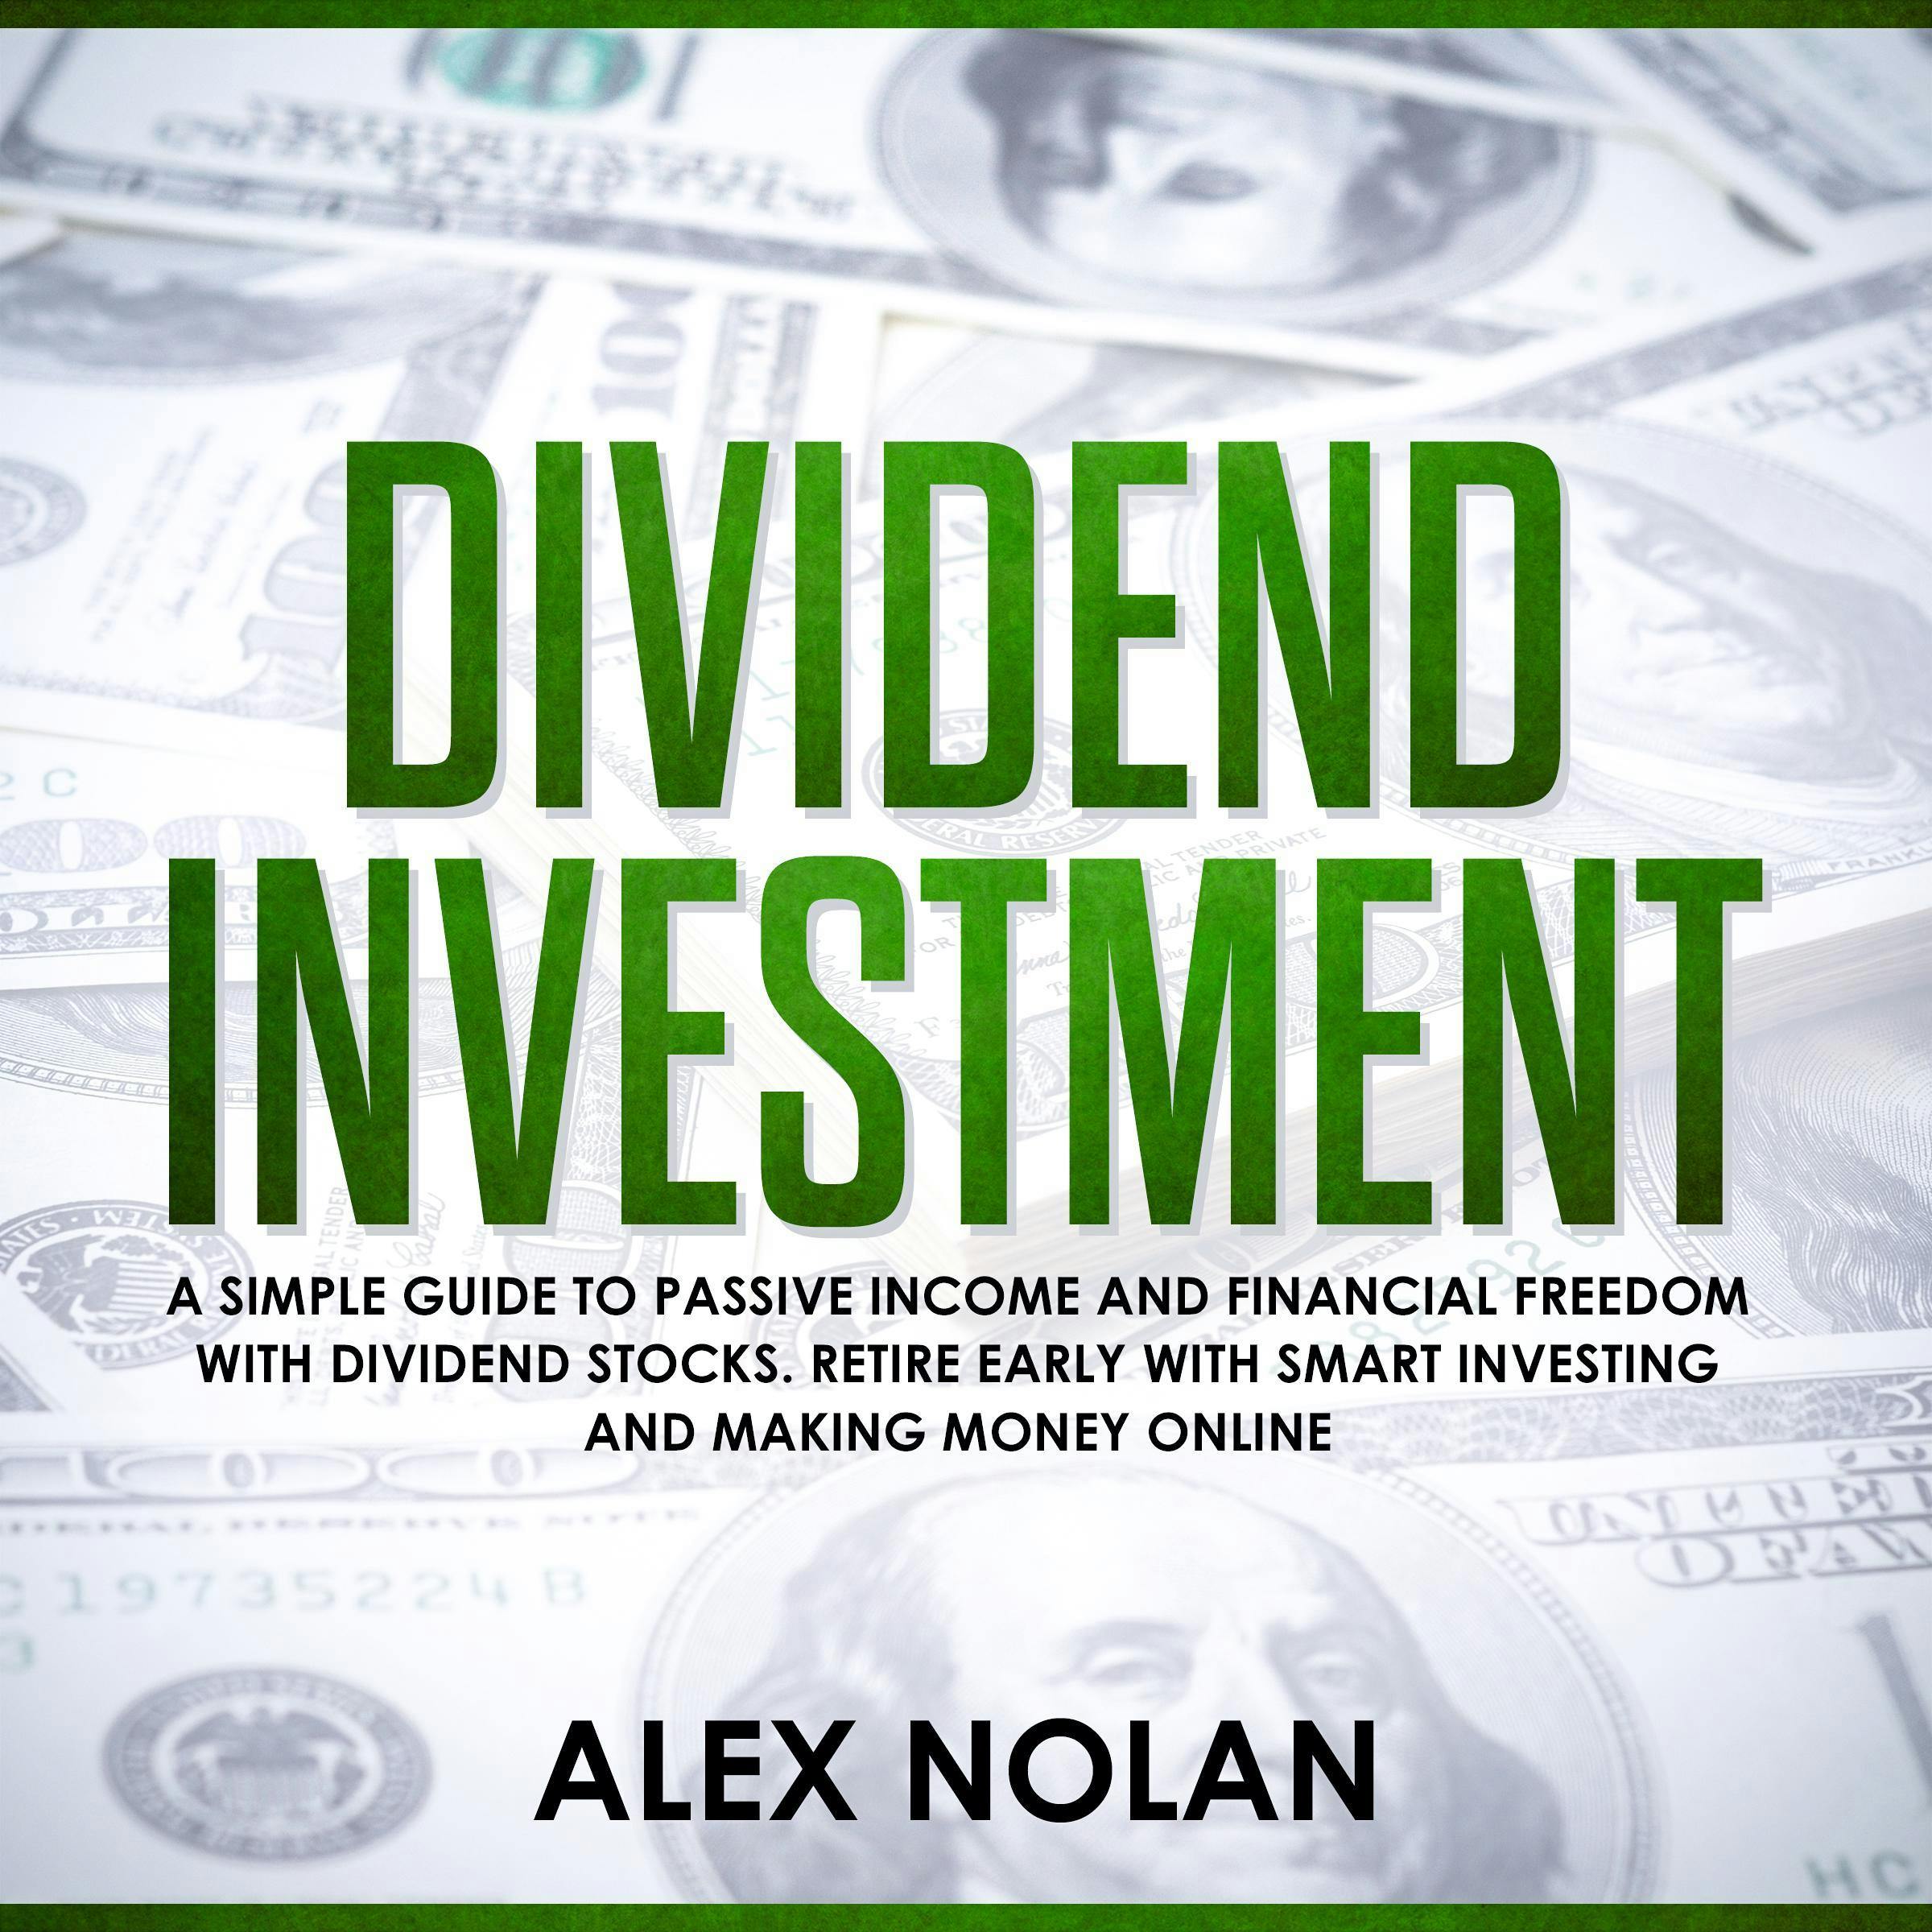 Dividend Investment: A Simple Guide to Passive Income and Financial Freedom with Dividend Stocks - Retire Early With Smart Stock Investing and Start Making Money Online - Alex Nolan